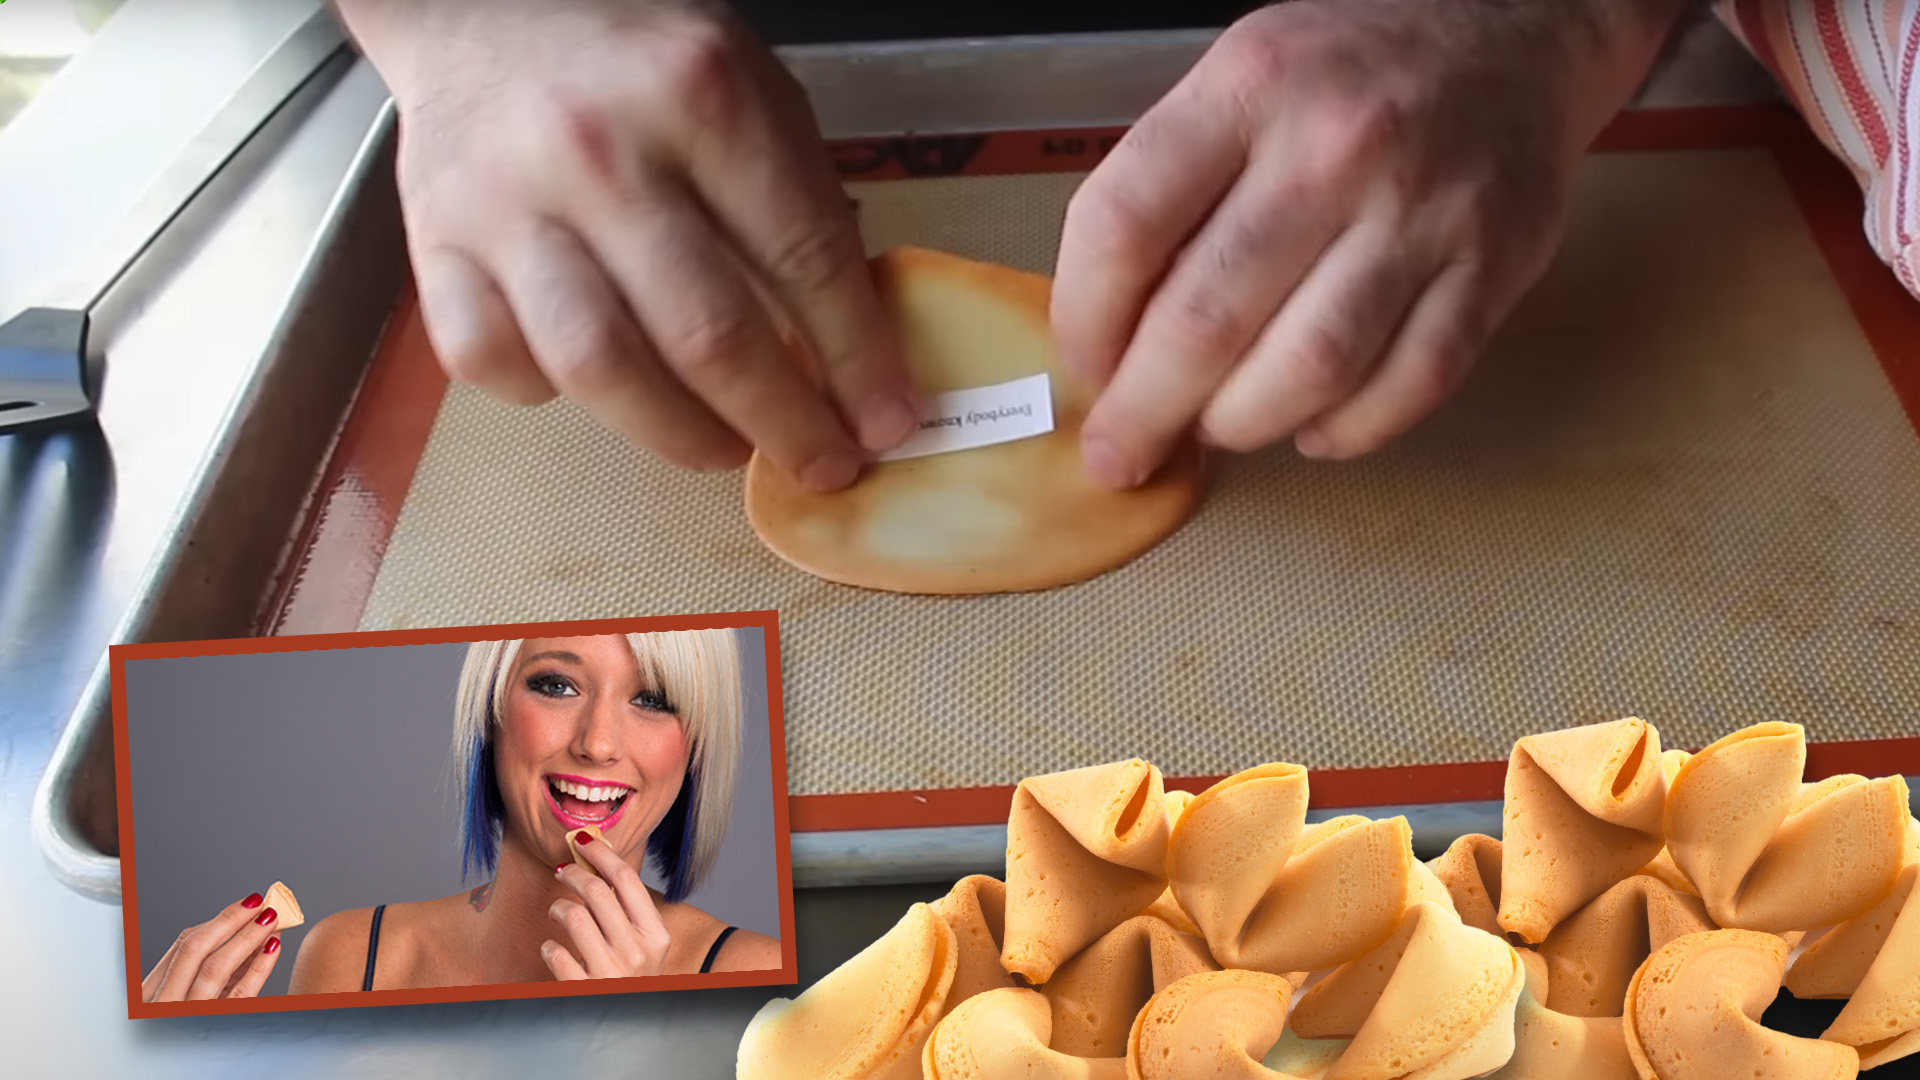 The Post reveals the secret history of the fortune cookie. Photo: SCMP composite/Shutterstock/YouTube